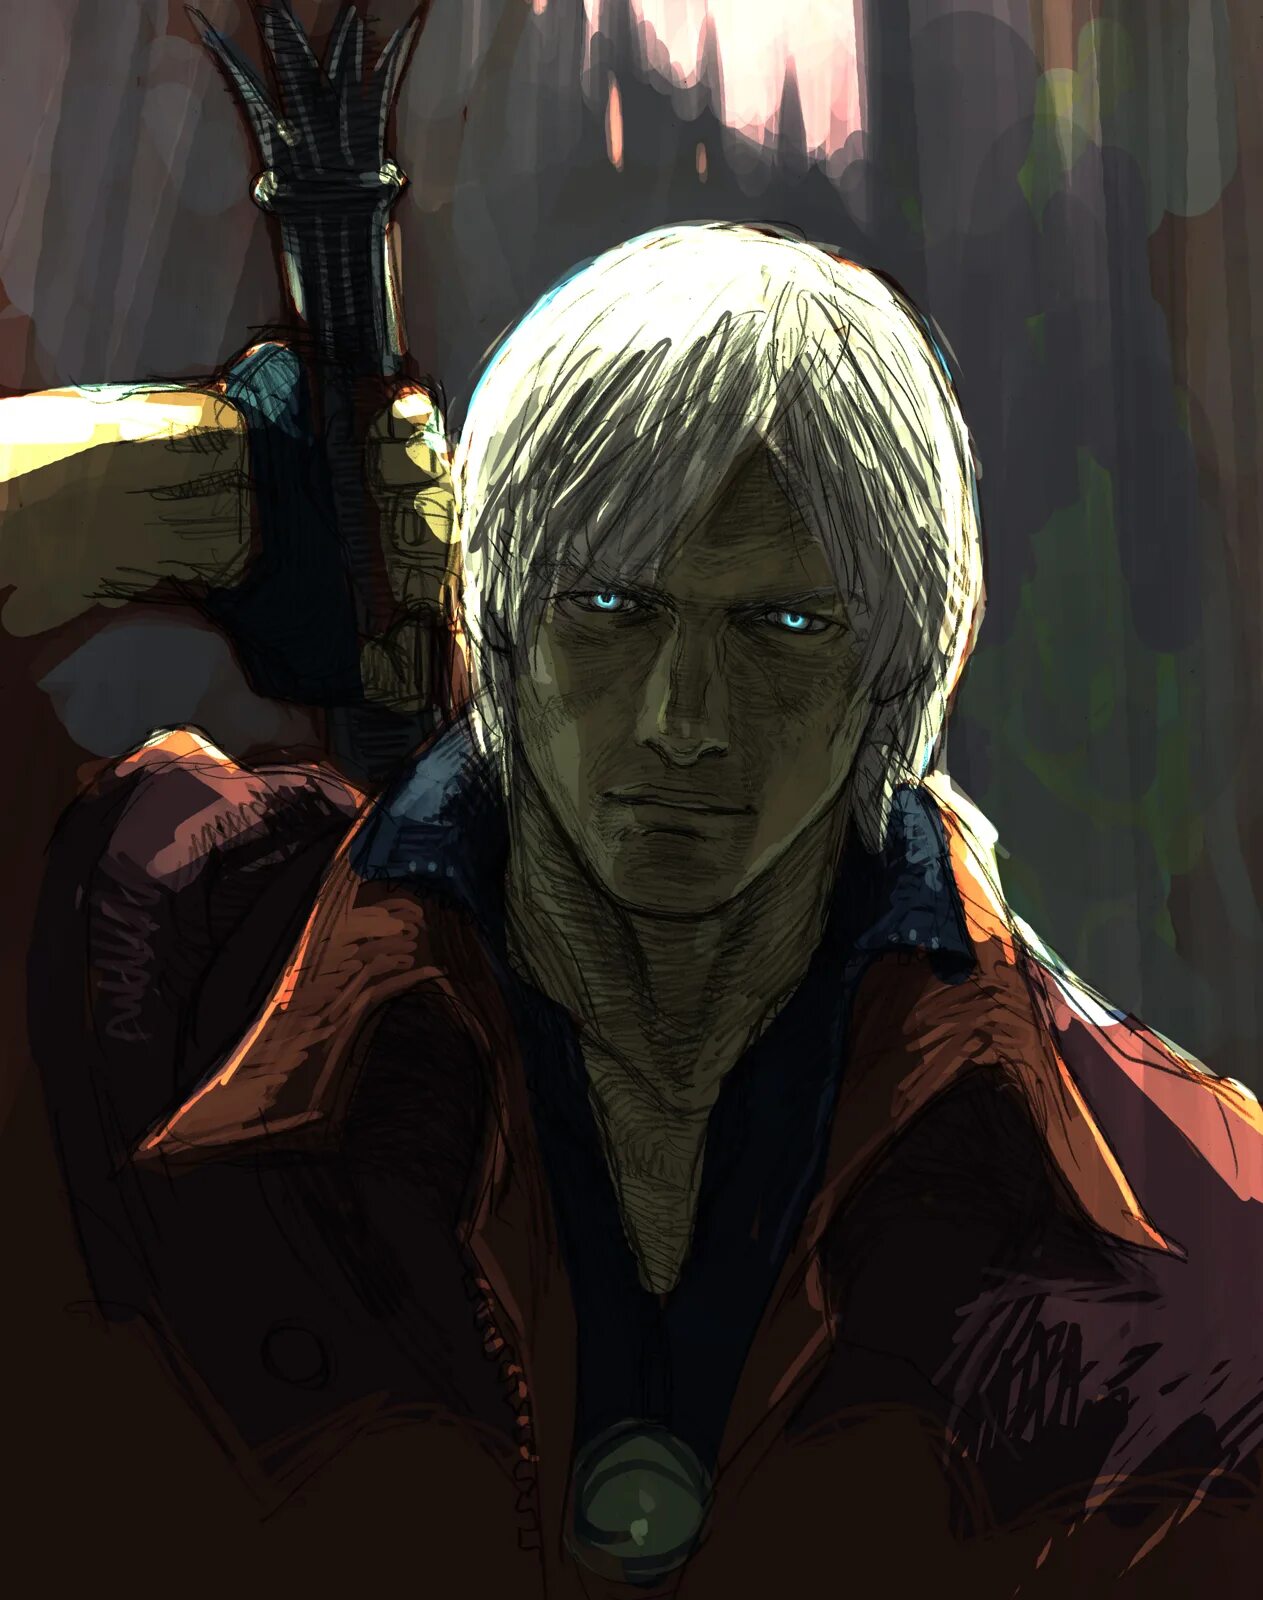 Данте Devil May Cry. Devil May Cry 4 Данте. Данте Devil May Cry 2013. Данте Devil May Cry 2.